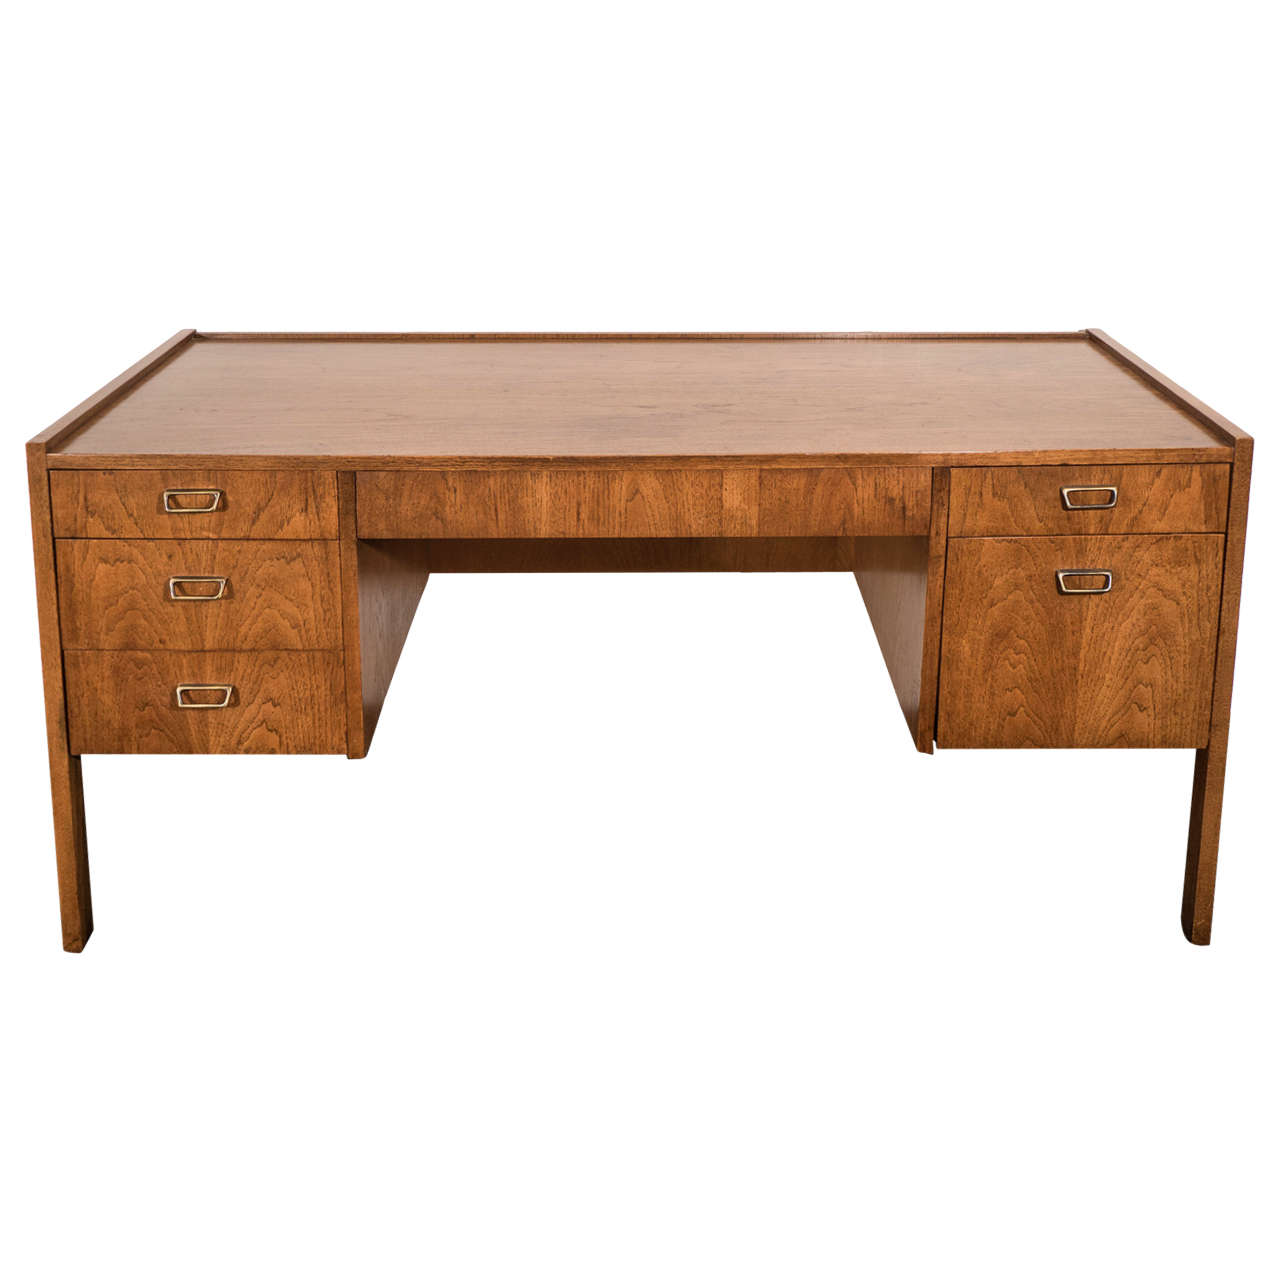 Midcentury Walnut Executive Desk by Founders